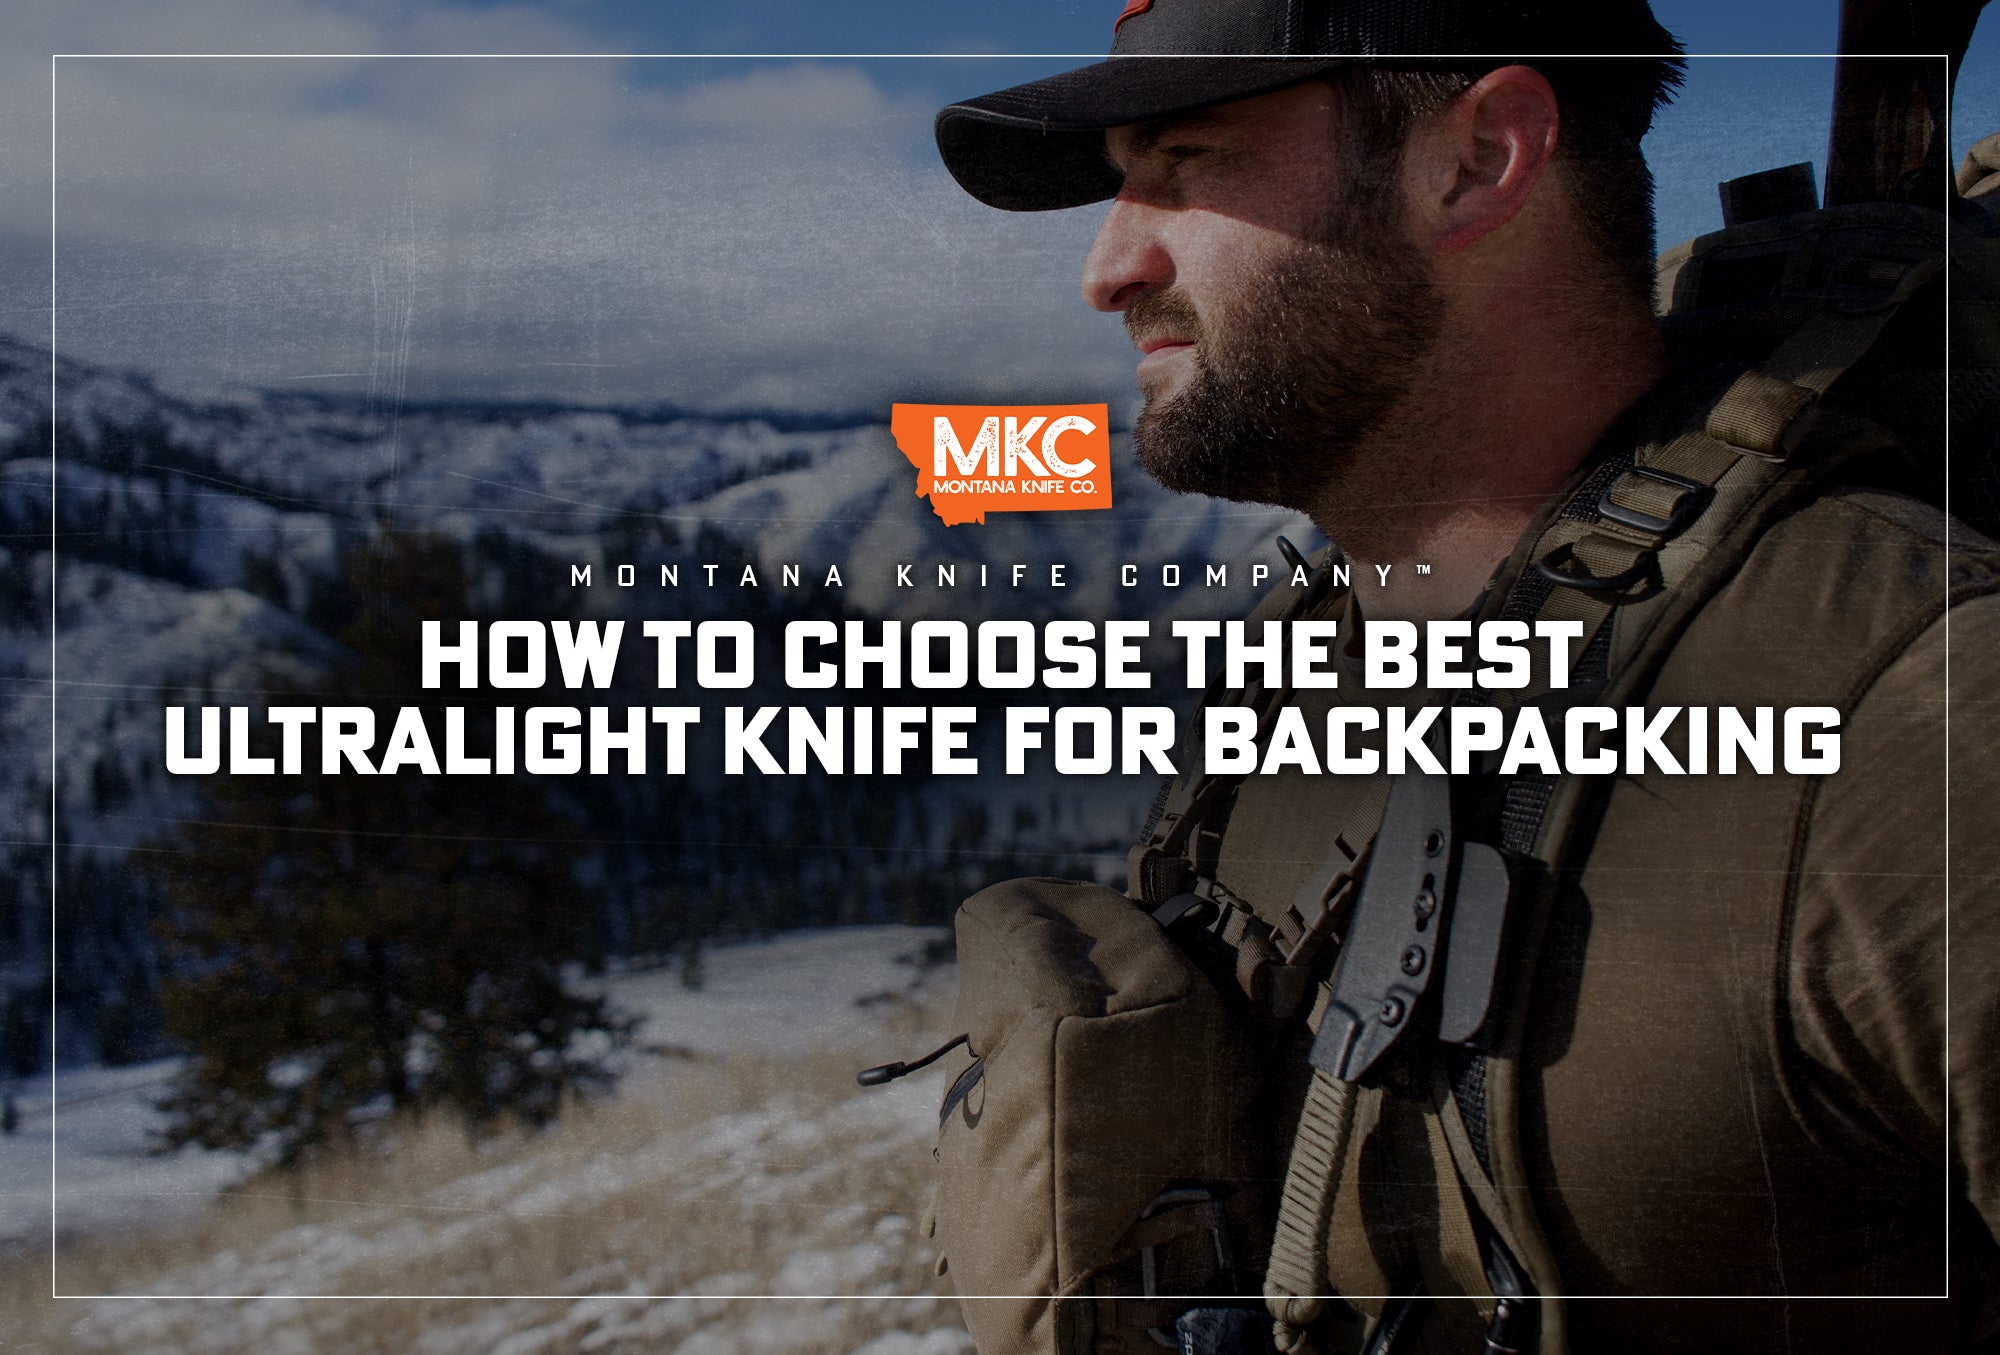 How to Choose the Best Ultralight Knife for Backpacking